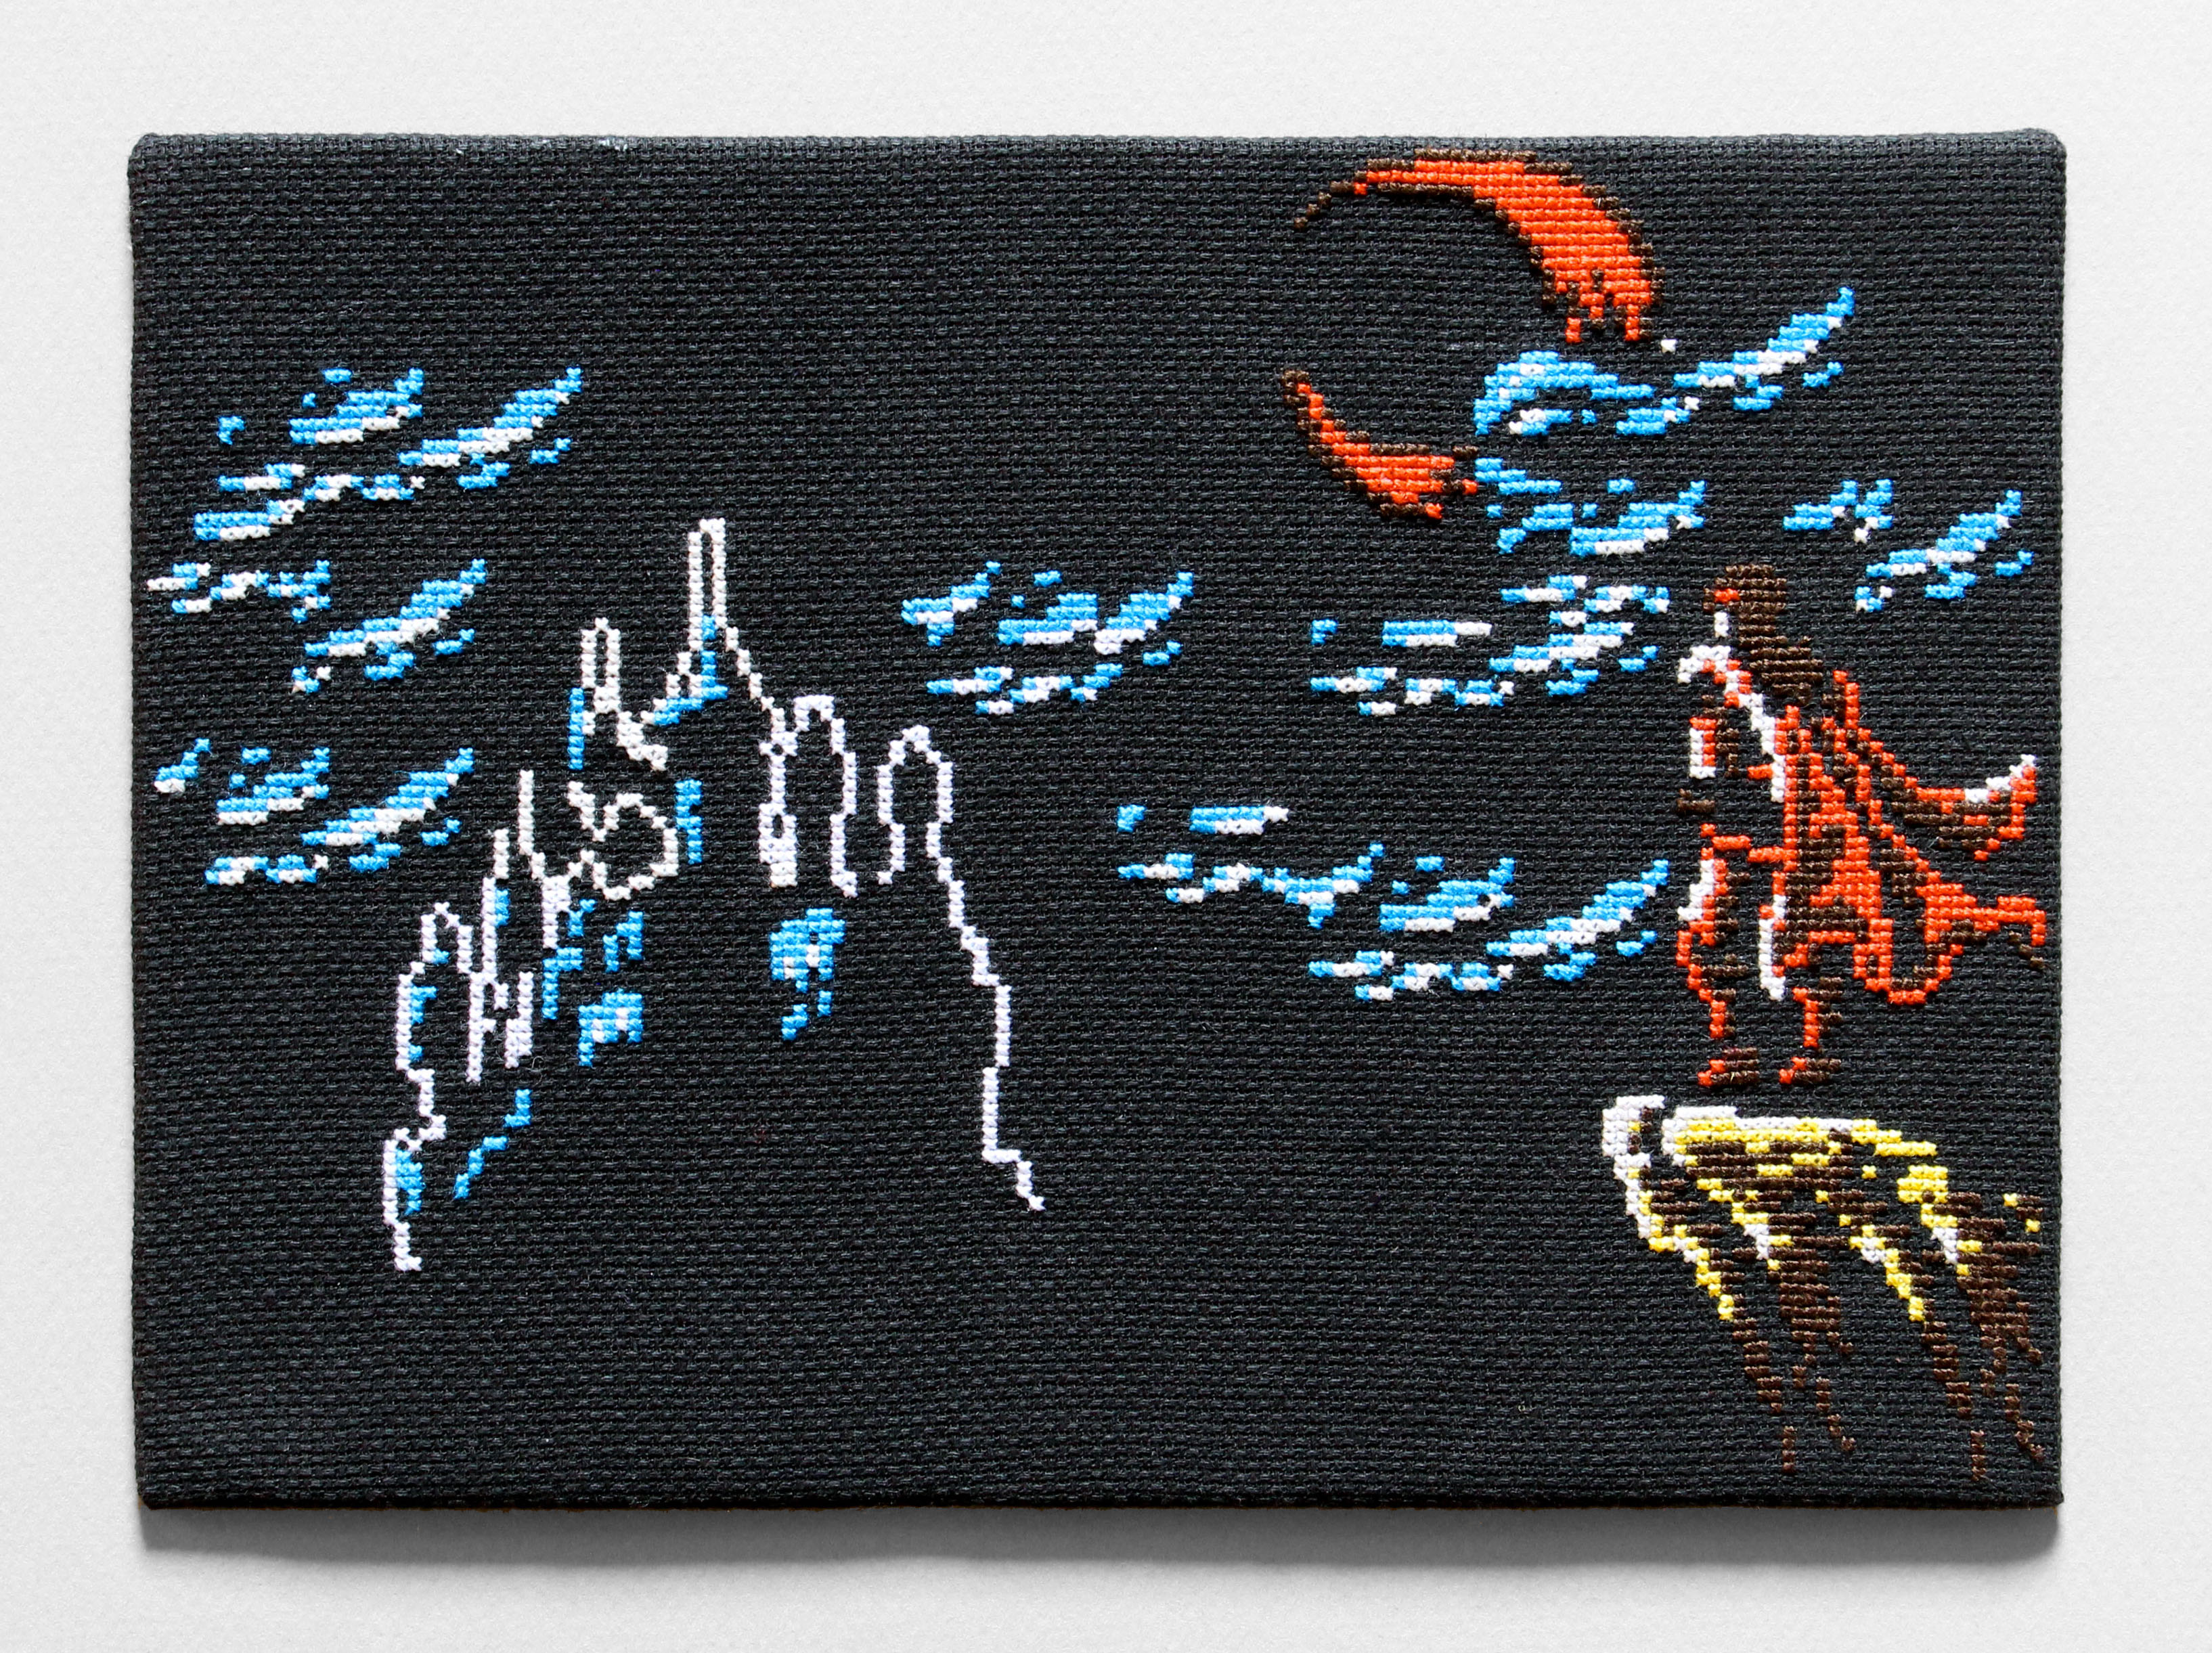  / Cross-stitch embroidery from *Castlevania III: Dracula’s Curse* video game on NES. Art by artist Marine Beaufils.